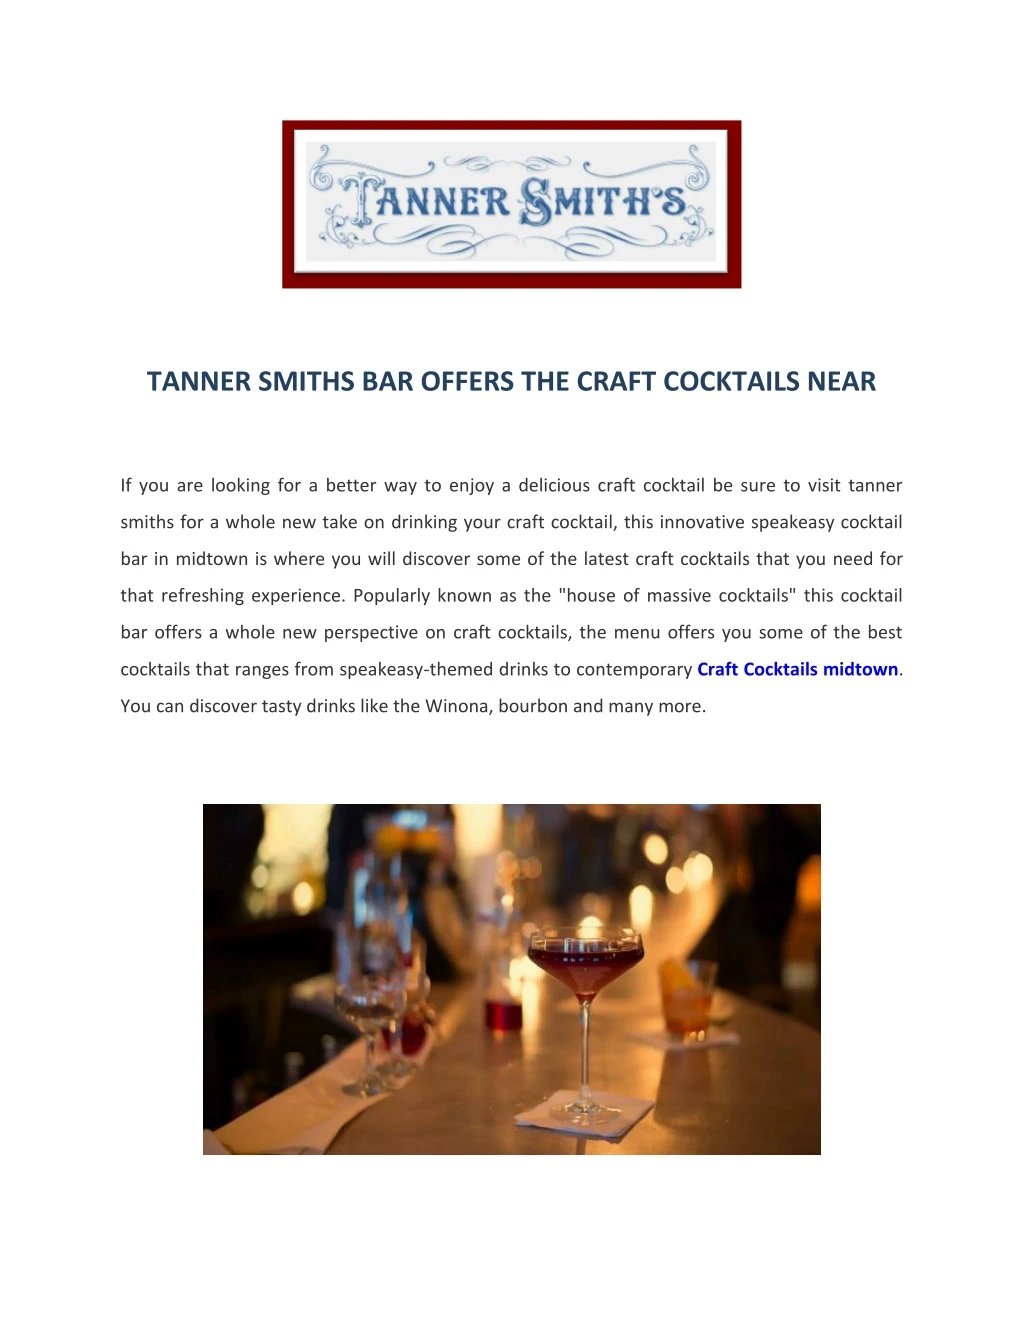 tanner smiths bar offers the craft cocktails near